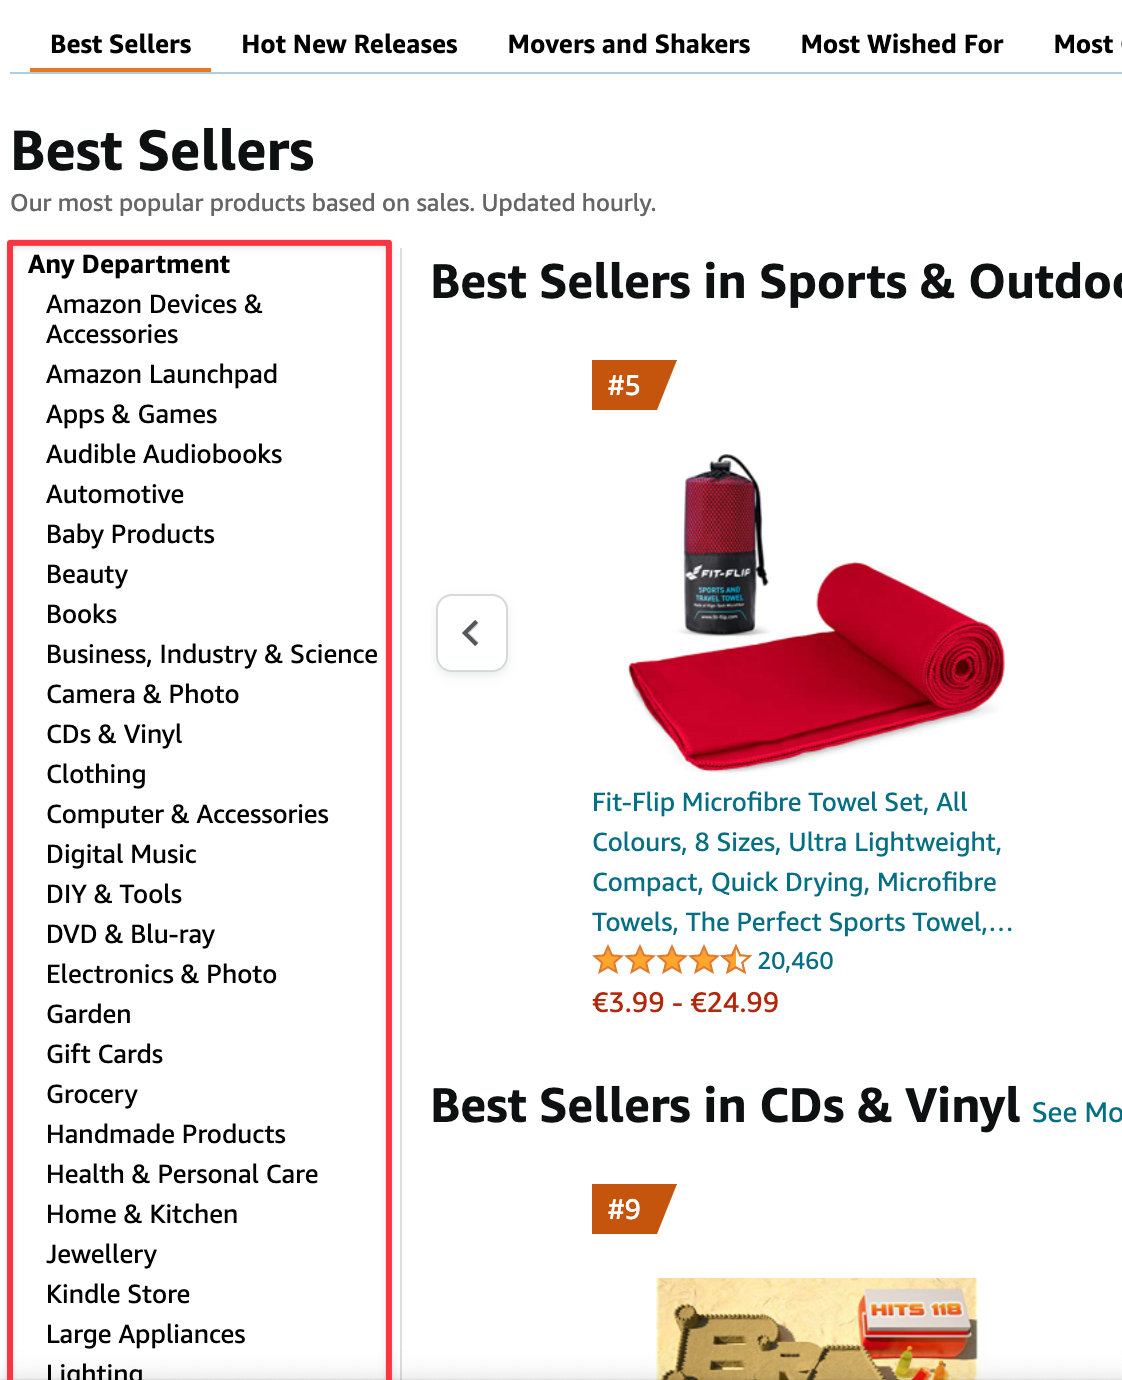 All main categories currently available on Amazon